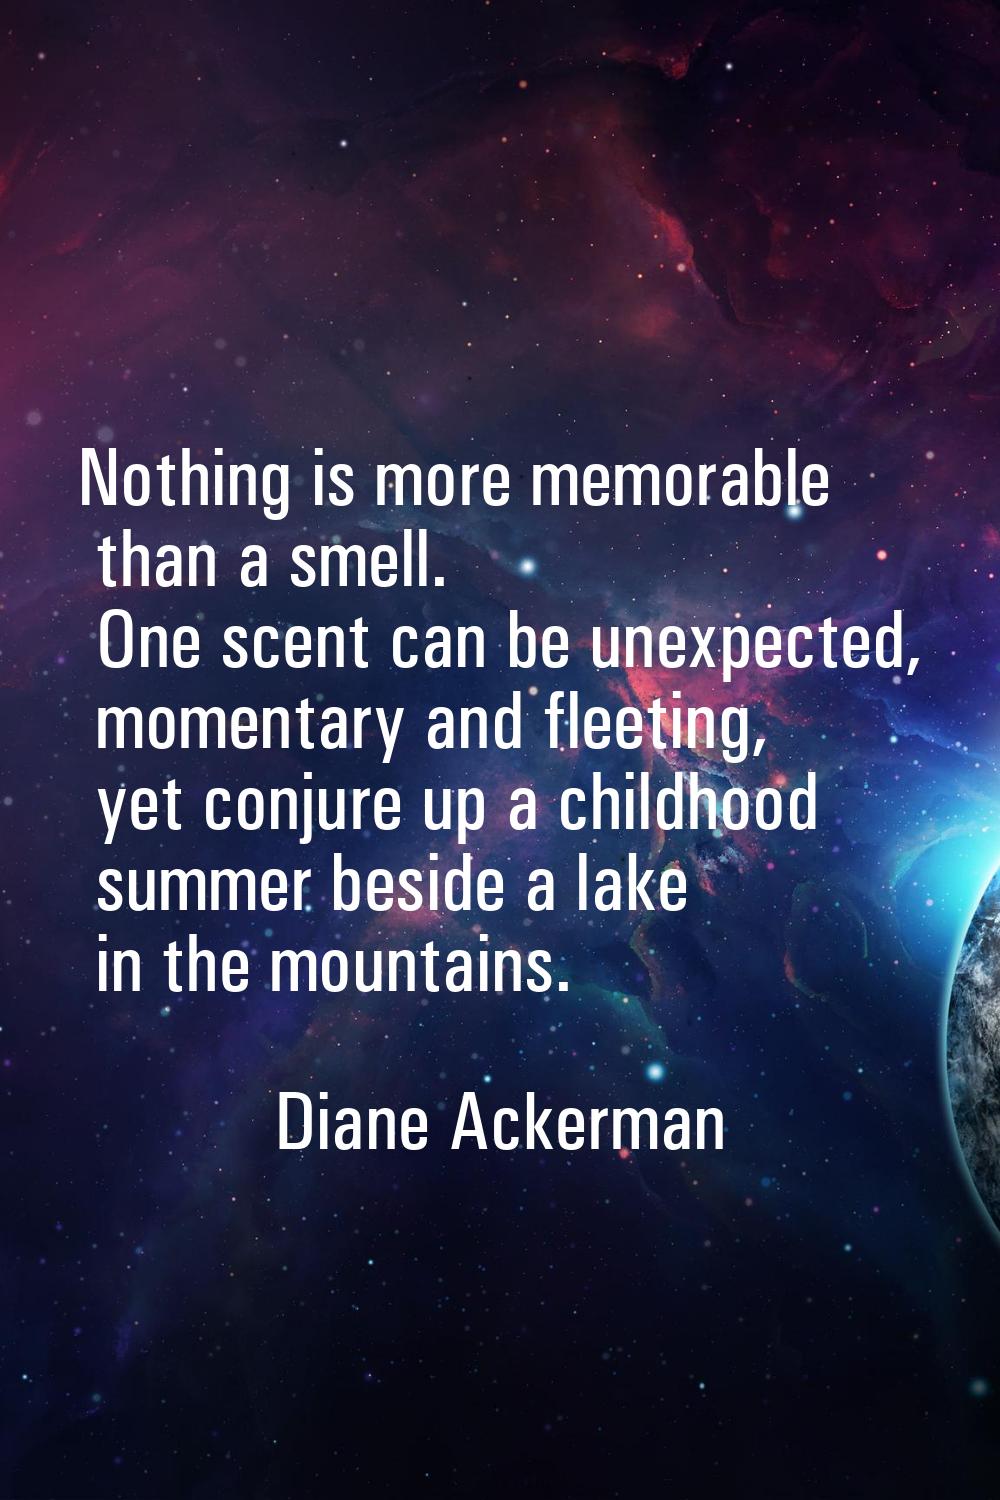 Nothing is more memorable than a smell. One scent can be unexpected, momentary and fleeting, yet co